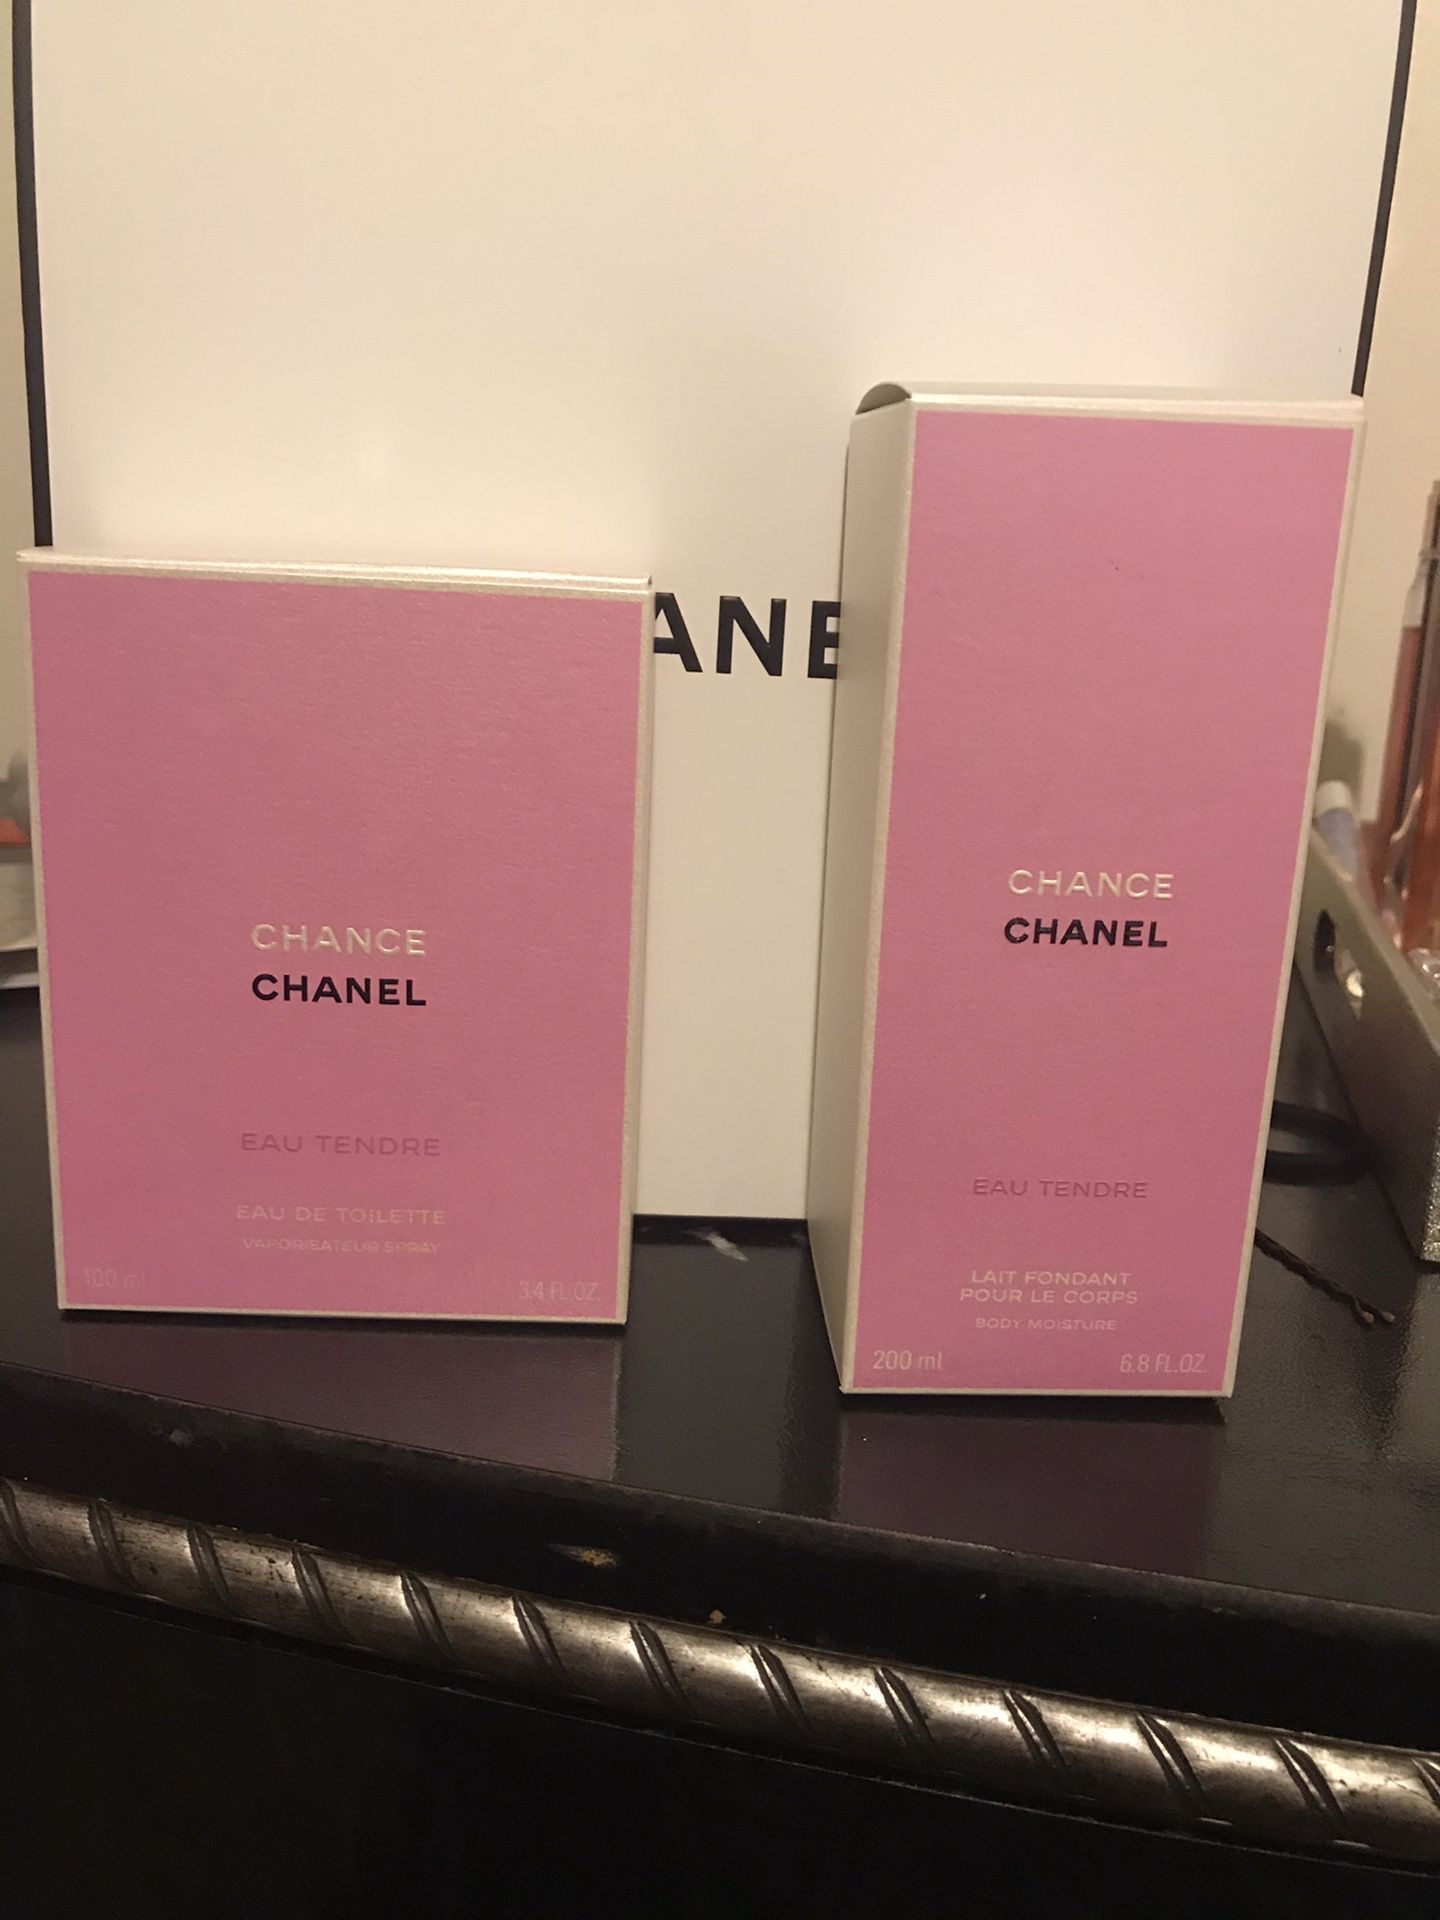 New Chanel Chance Eau Tendre perfume and lotion